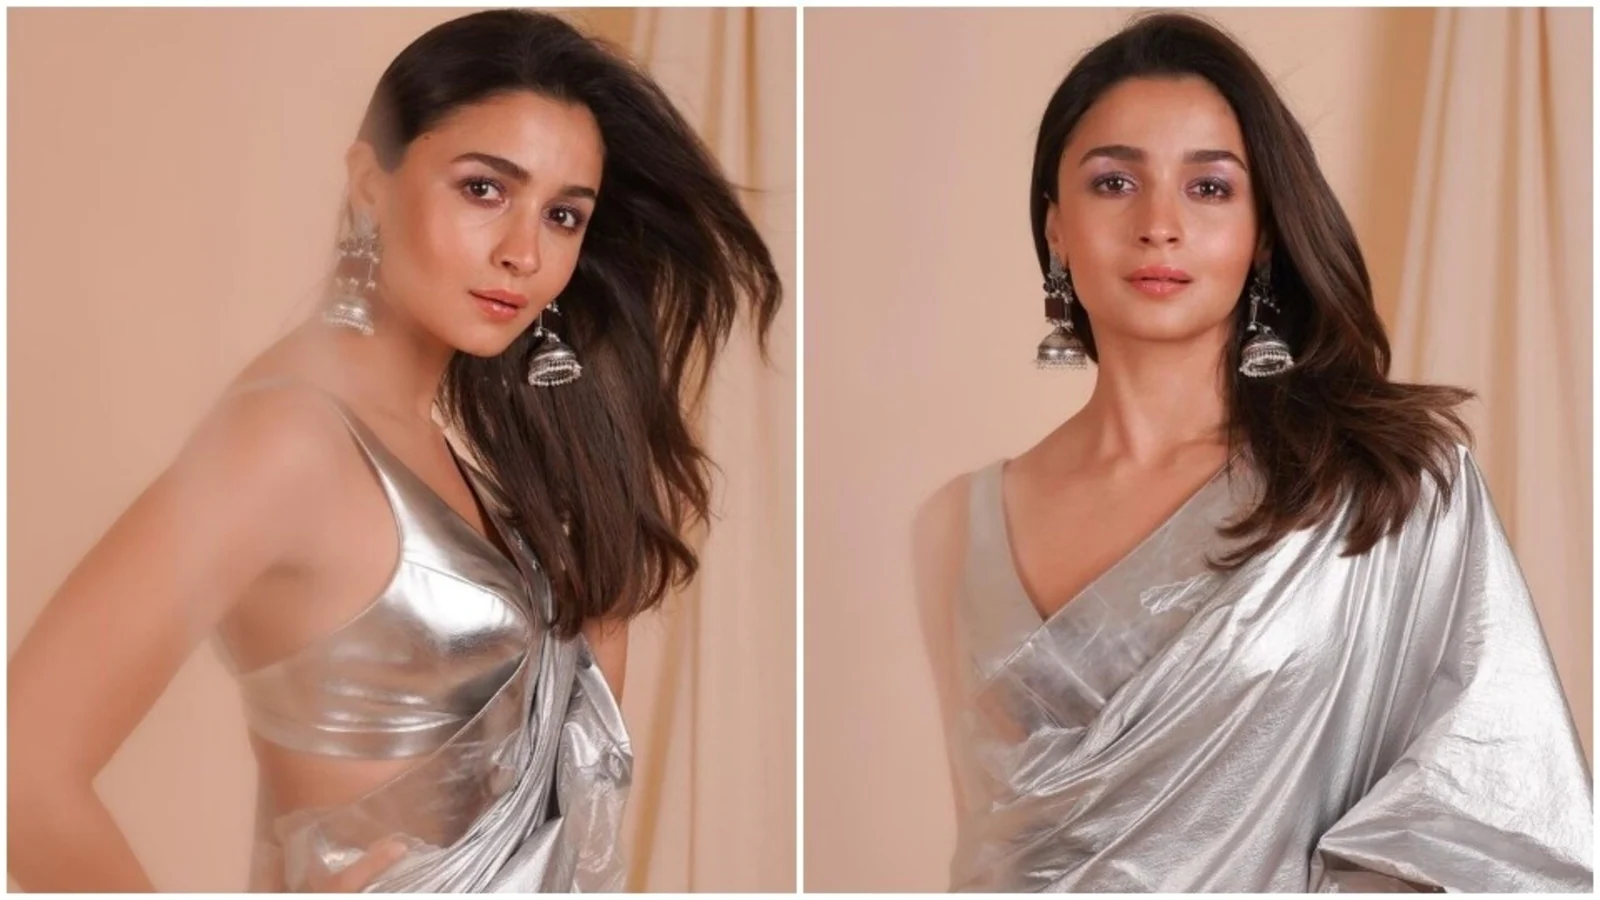 Alia Bhatt wears ₹25k silver saree and sleeveless blouse to ITA Awards, leaves Internet divided: Check out pics